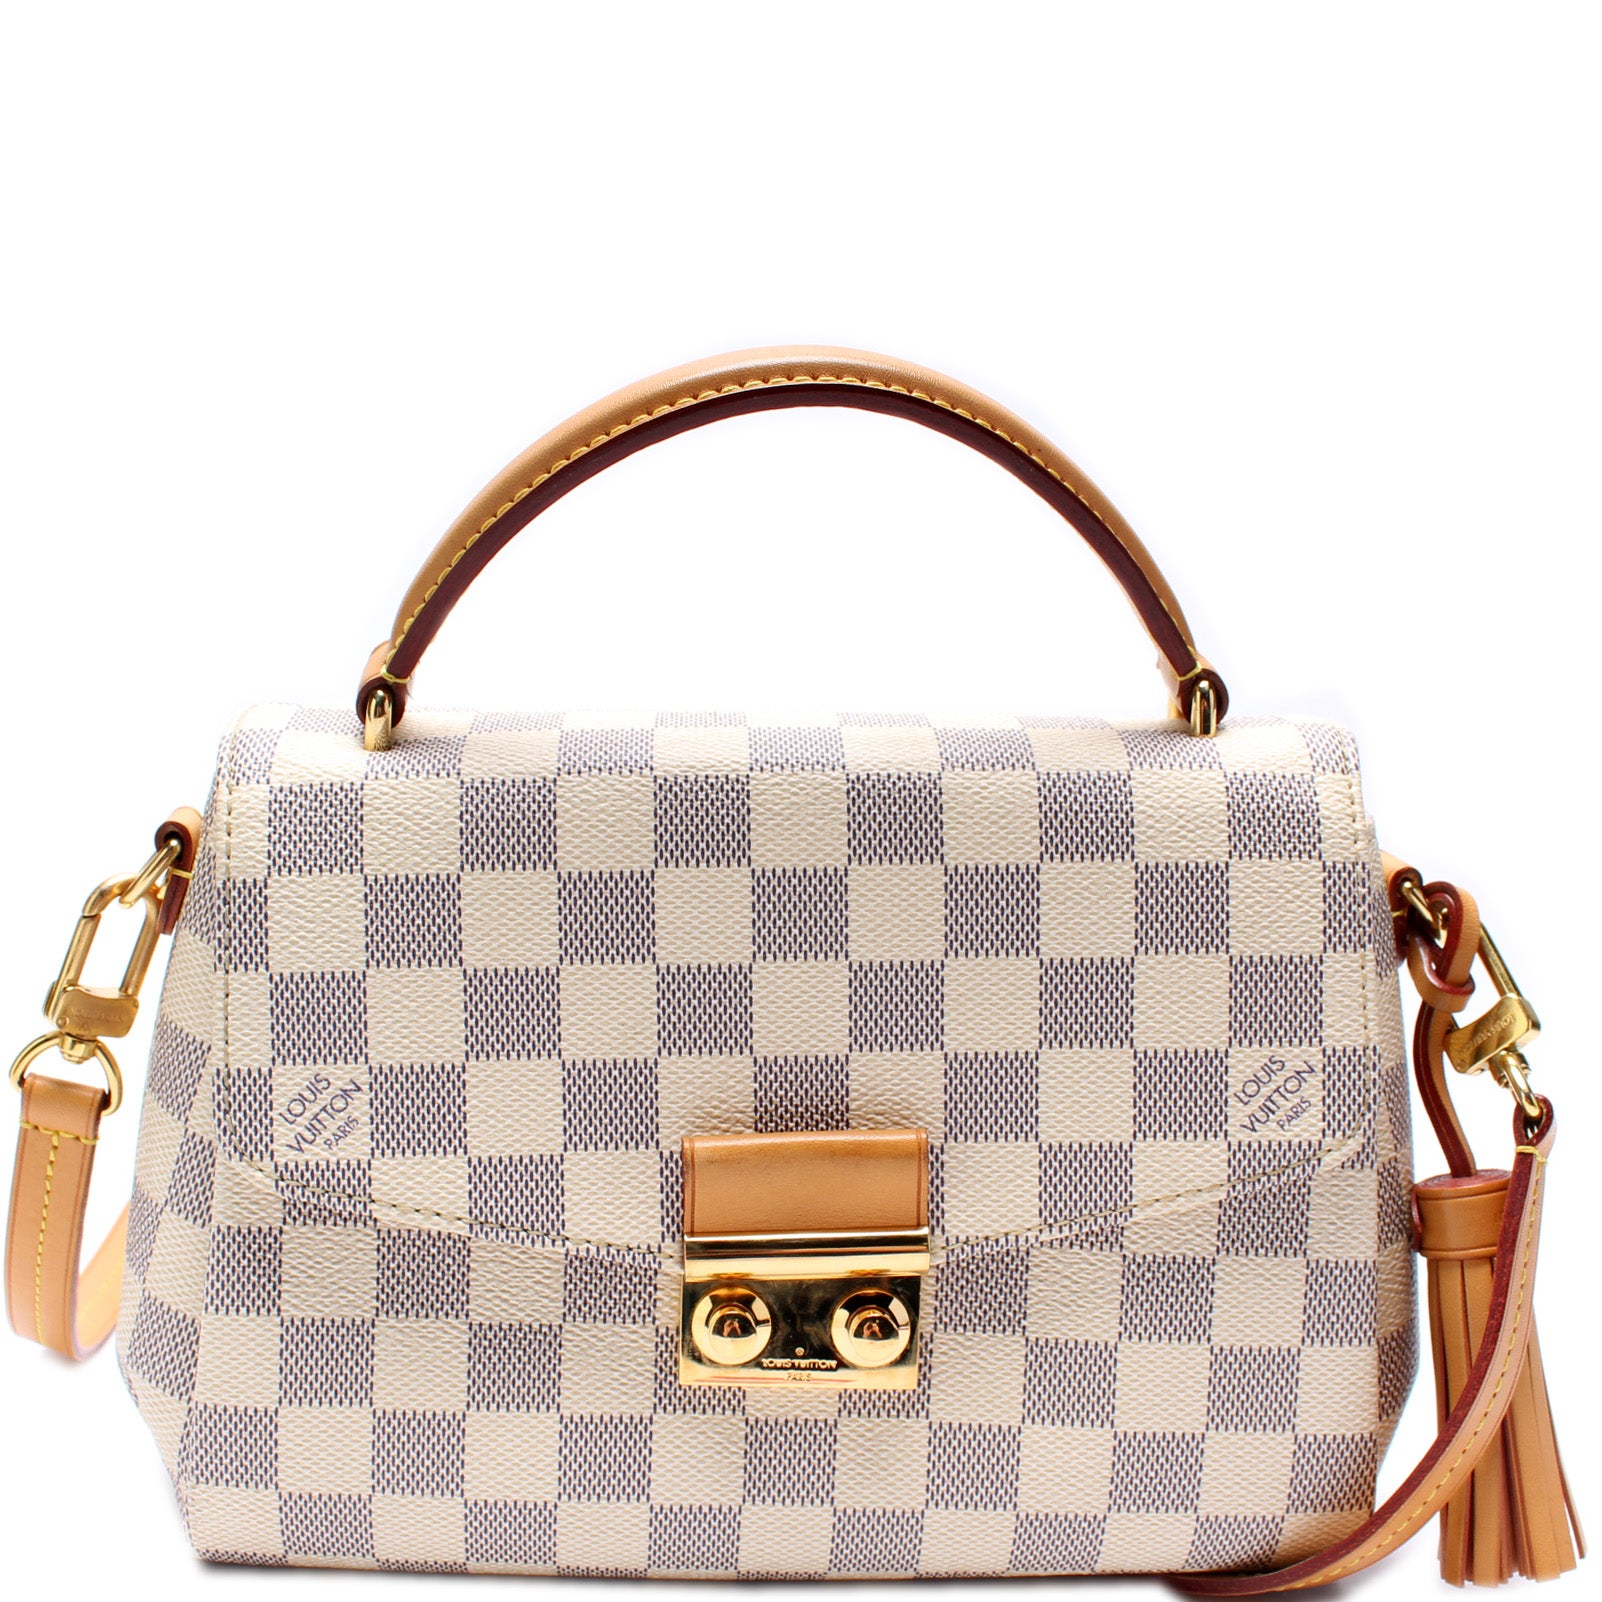 Louis Vuitton - Authenticated Croisette Handbag - Leather White for Women, Very Good Condition